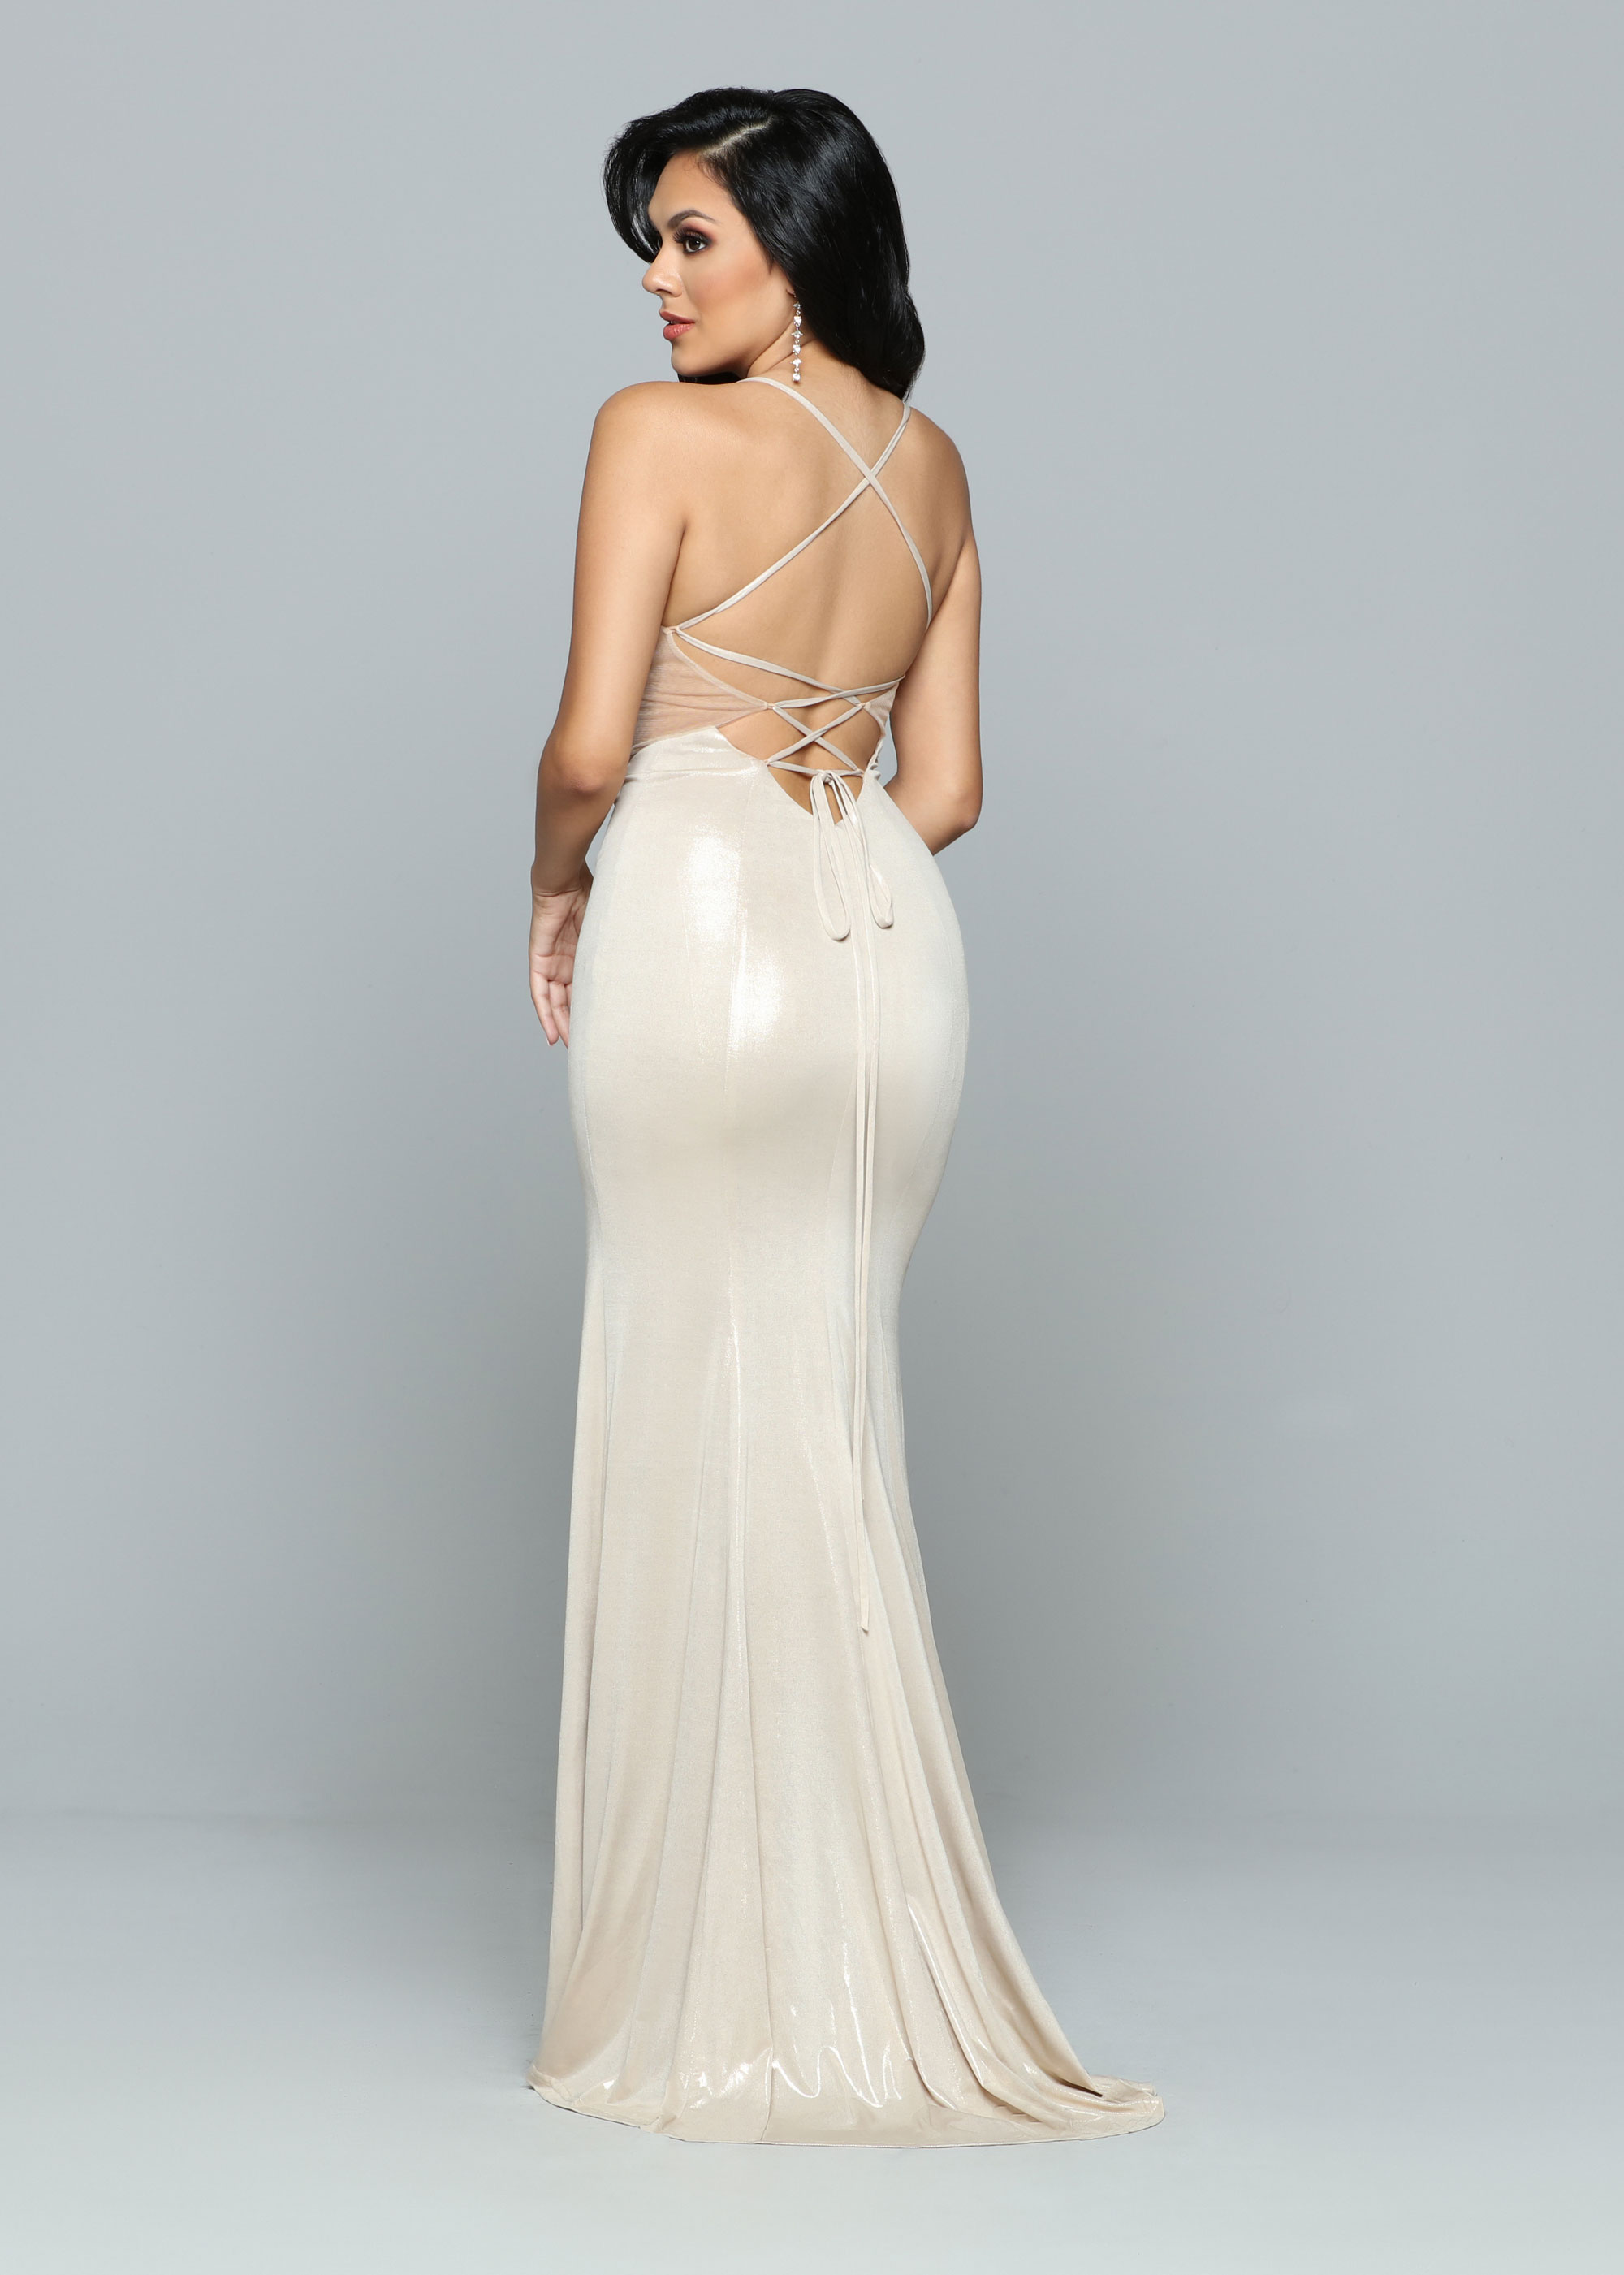 Image showing back view of style #72207